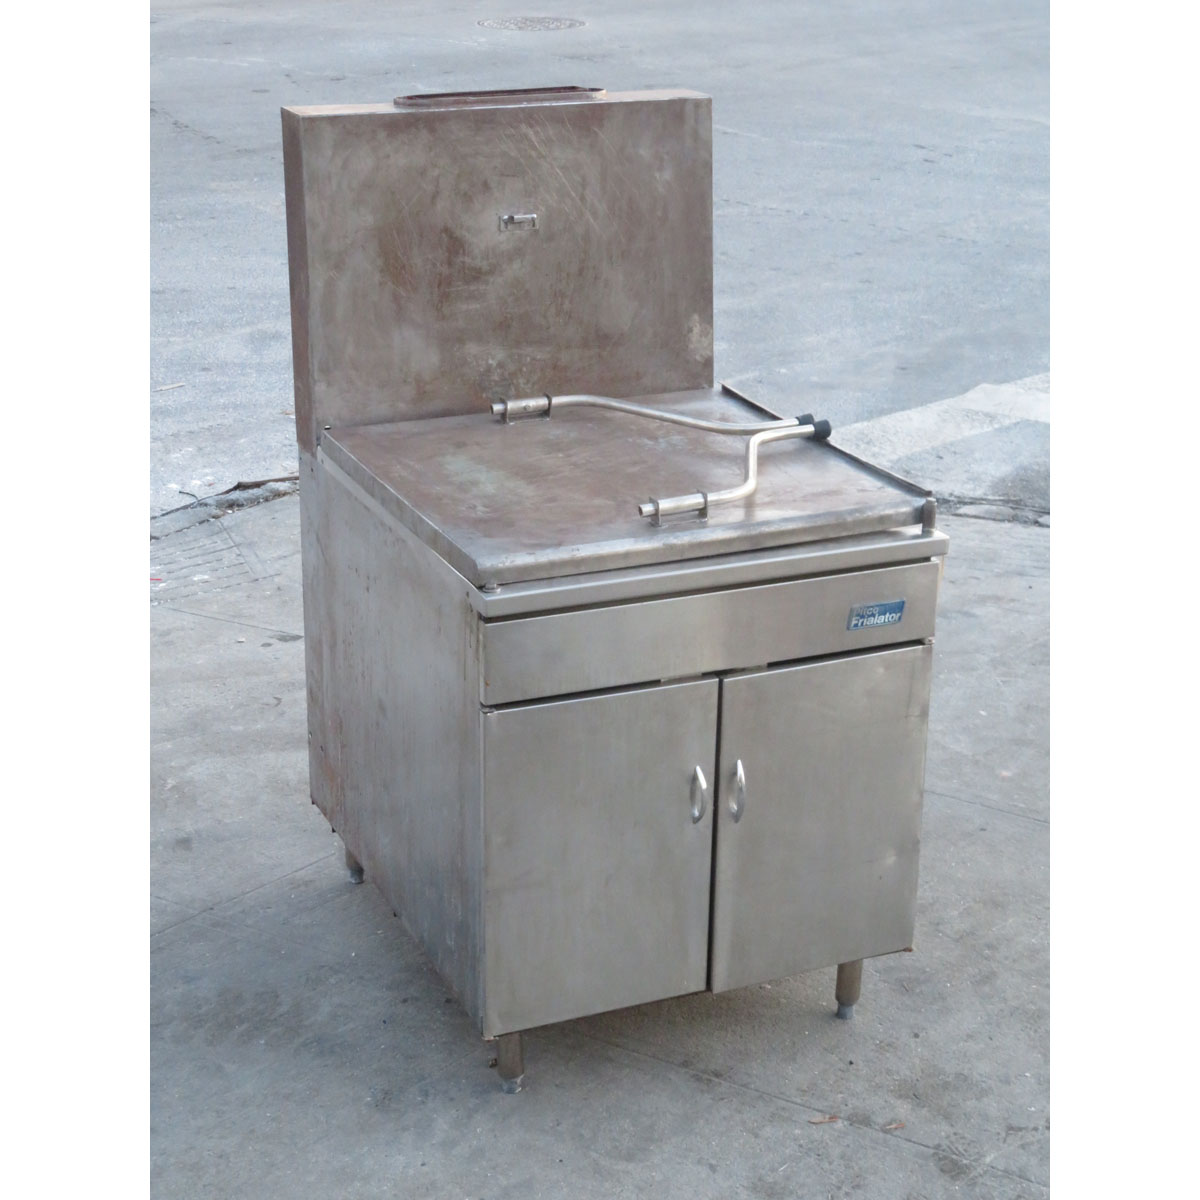 Pitco 26-S Natural Gas Fryer, Used Very Good Condition image 4